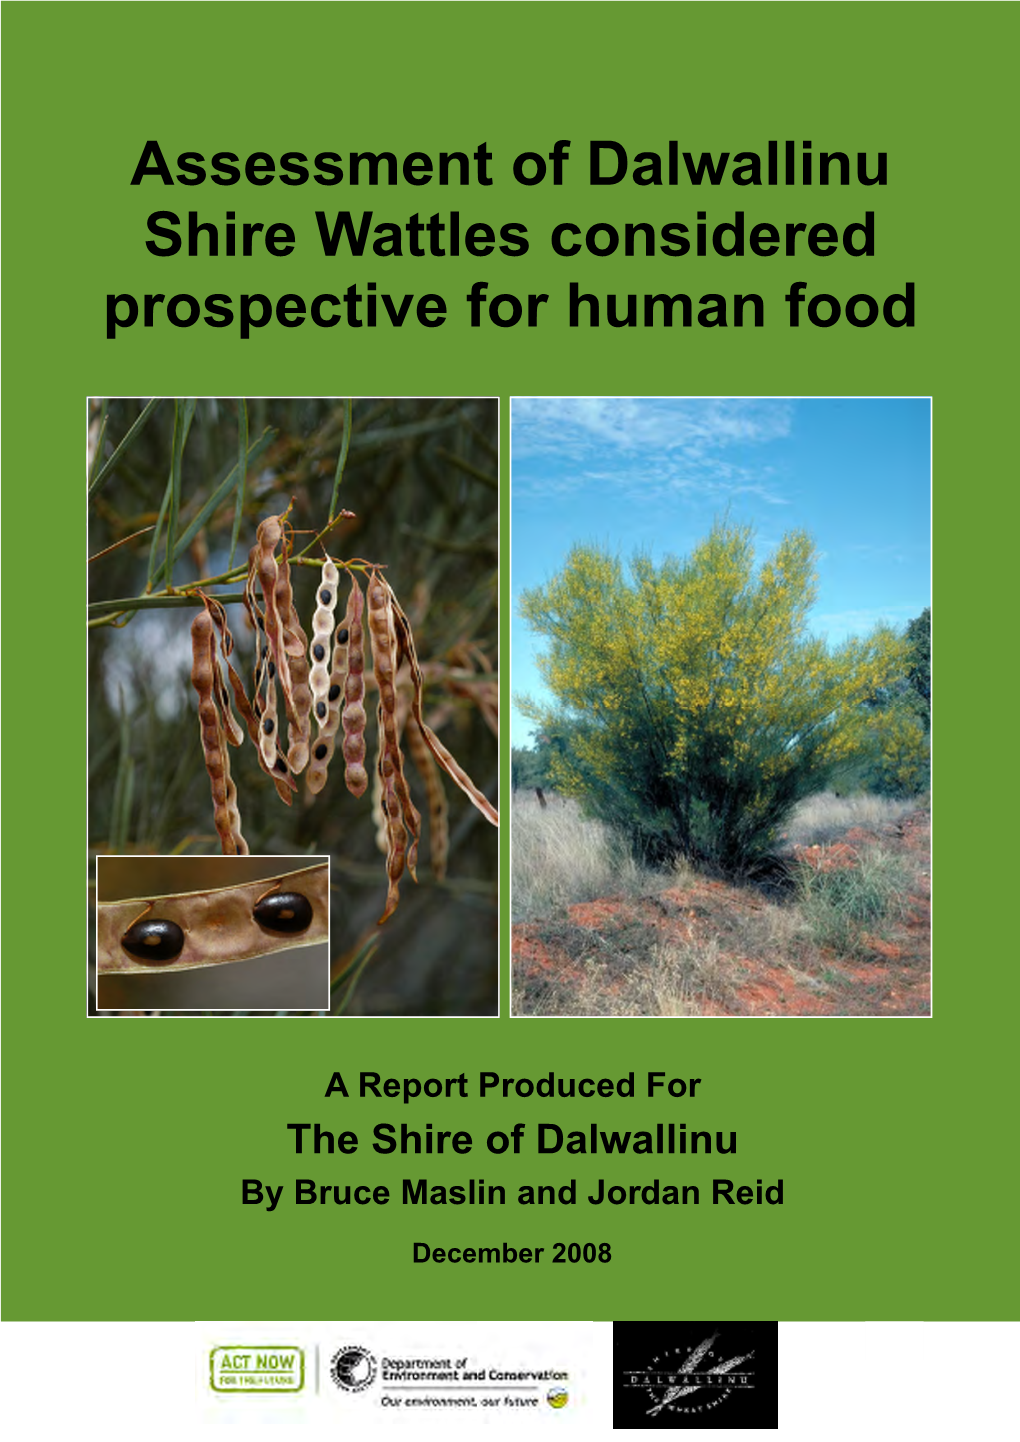 Assessment of Dalwallinu Shire Wattles Considered Prospective for Human Food